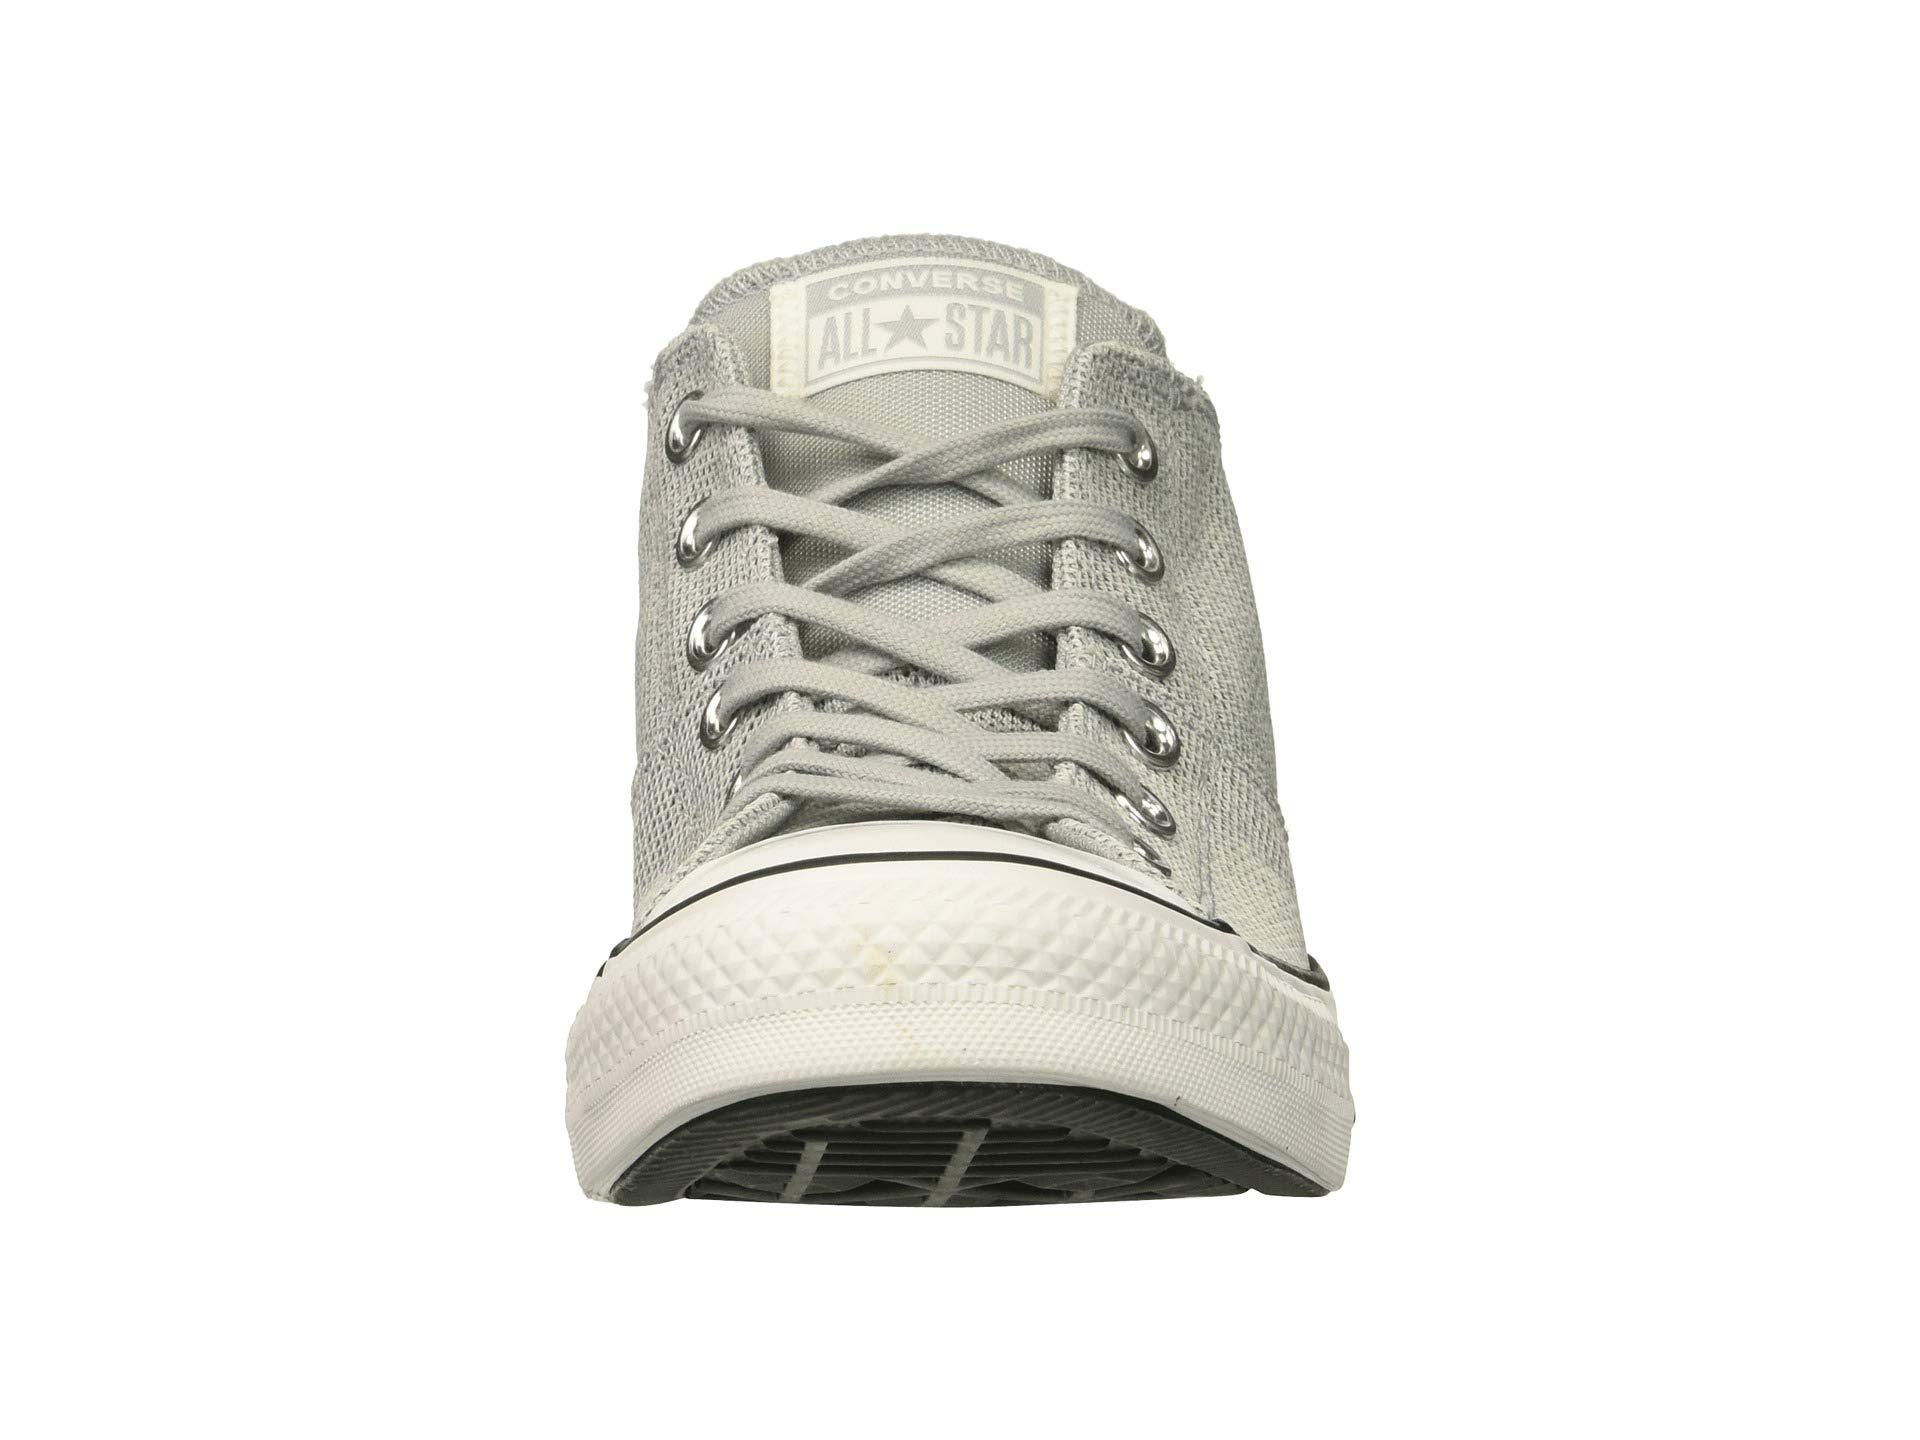 Converse Chuck Taylor All Star Madison High Top Sneakers in Gray | Lyst